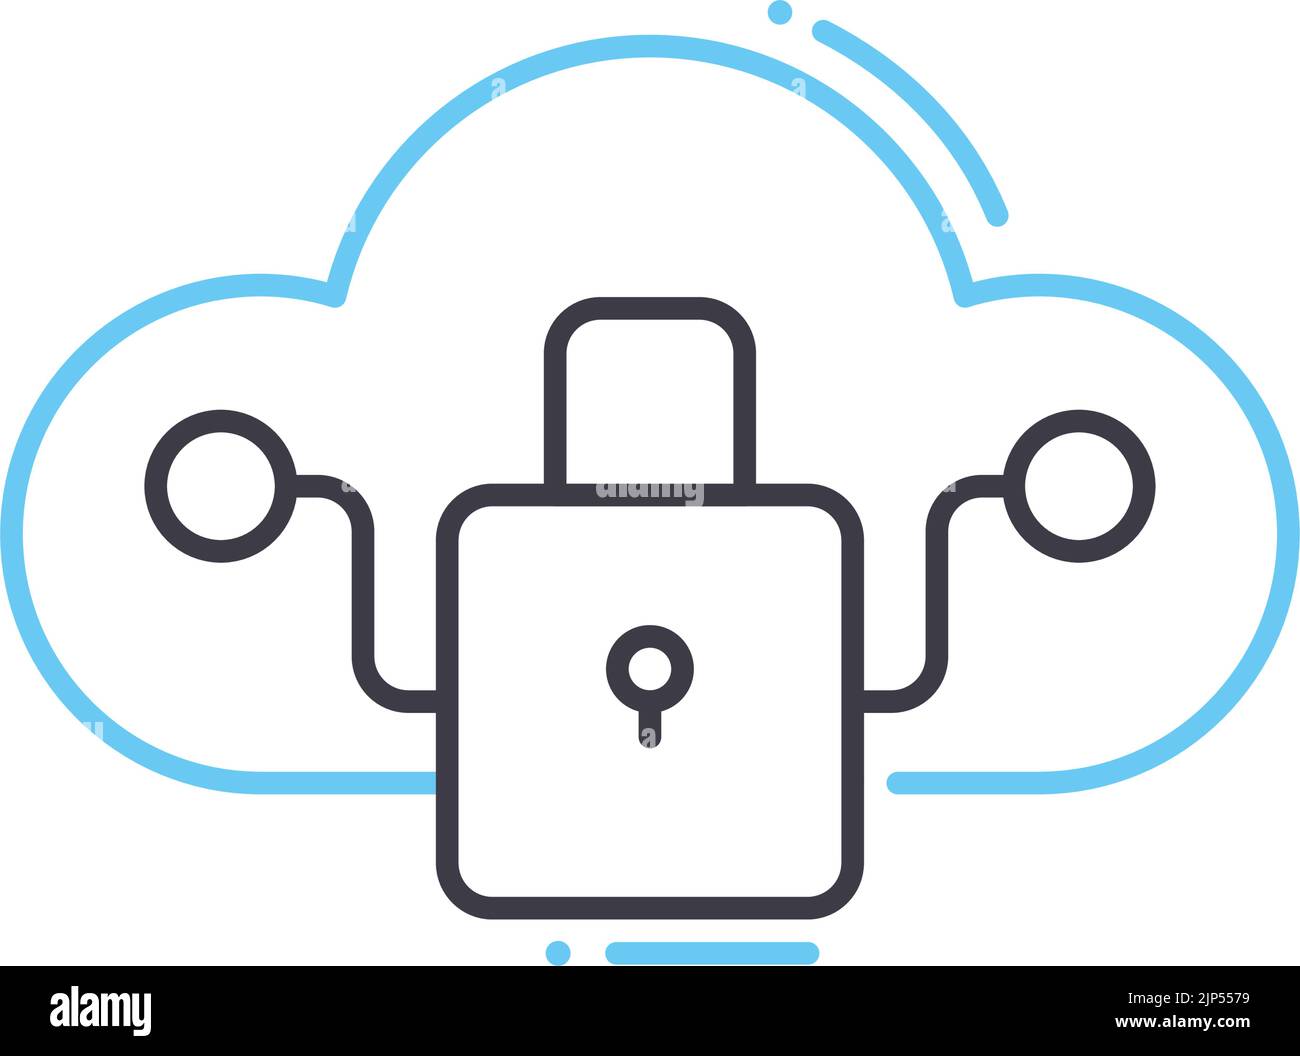 cloud security concept line icon, outline symbol, vector illustration, concept sign Stock Vector